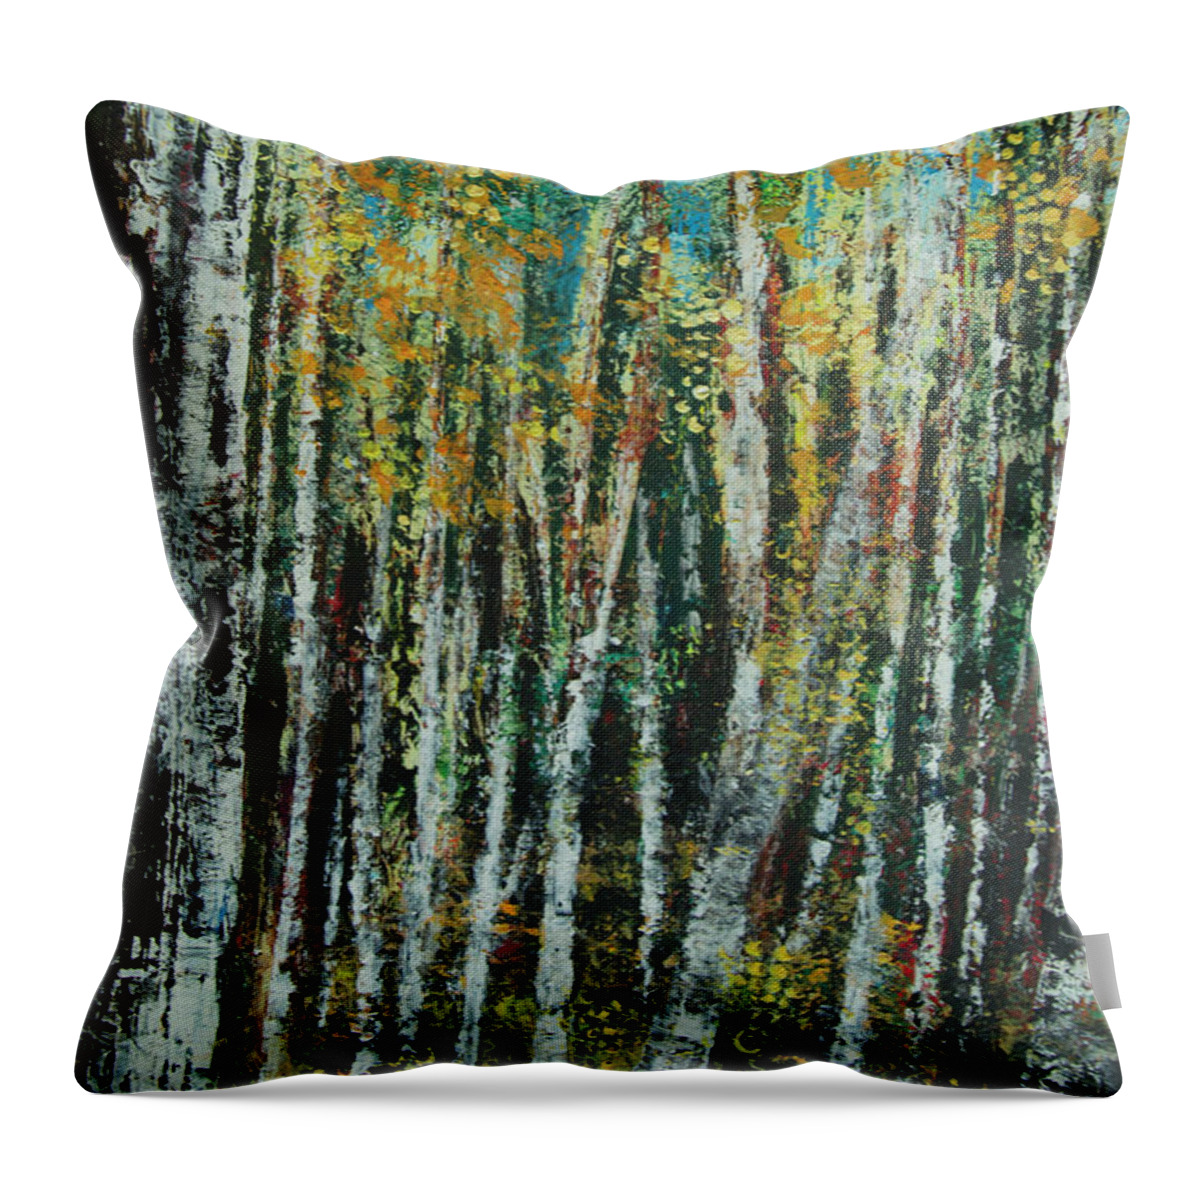 Landscape Throw Pillow featuring the painting Aspen Woods by Jeanette French